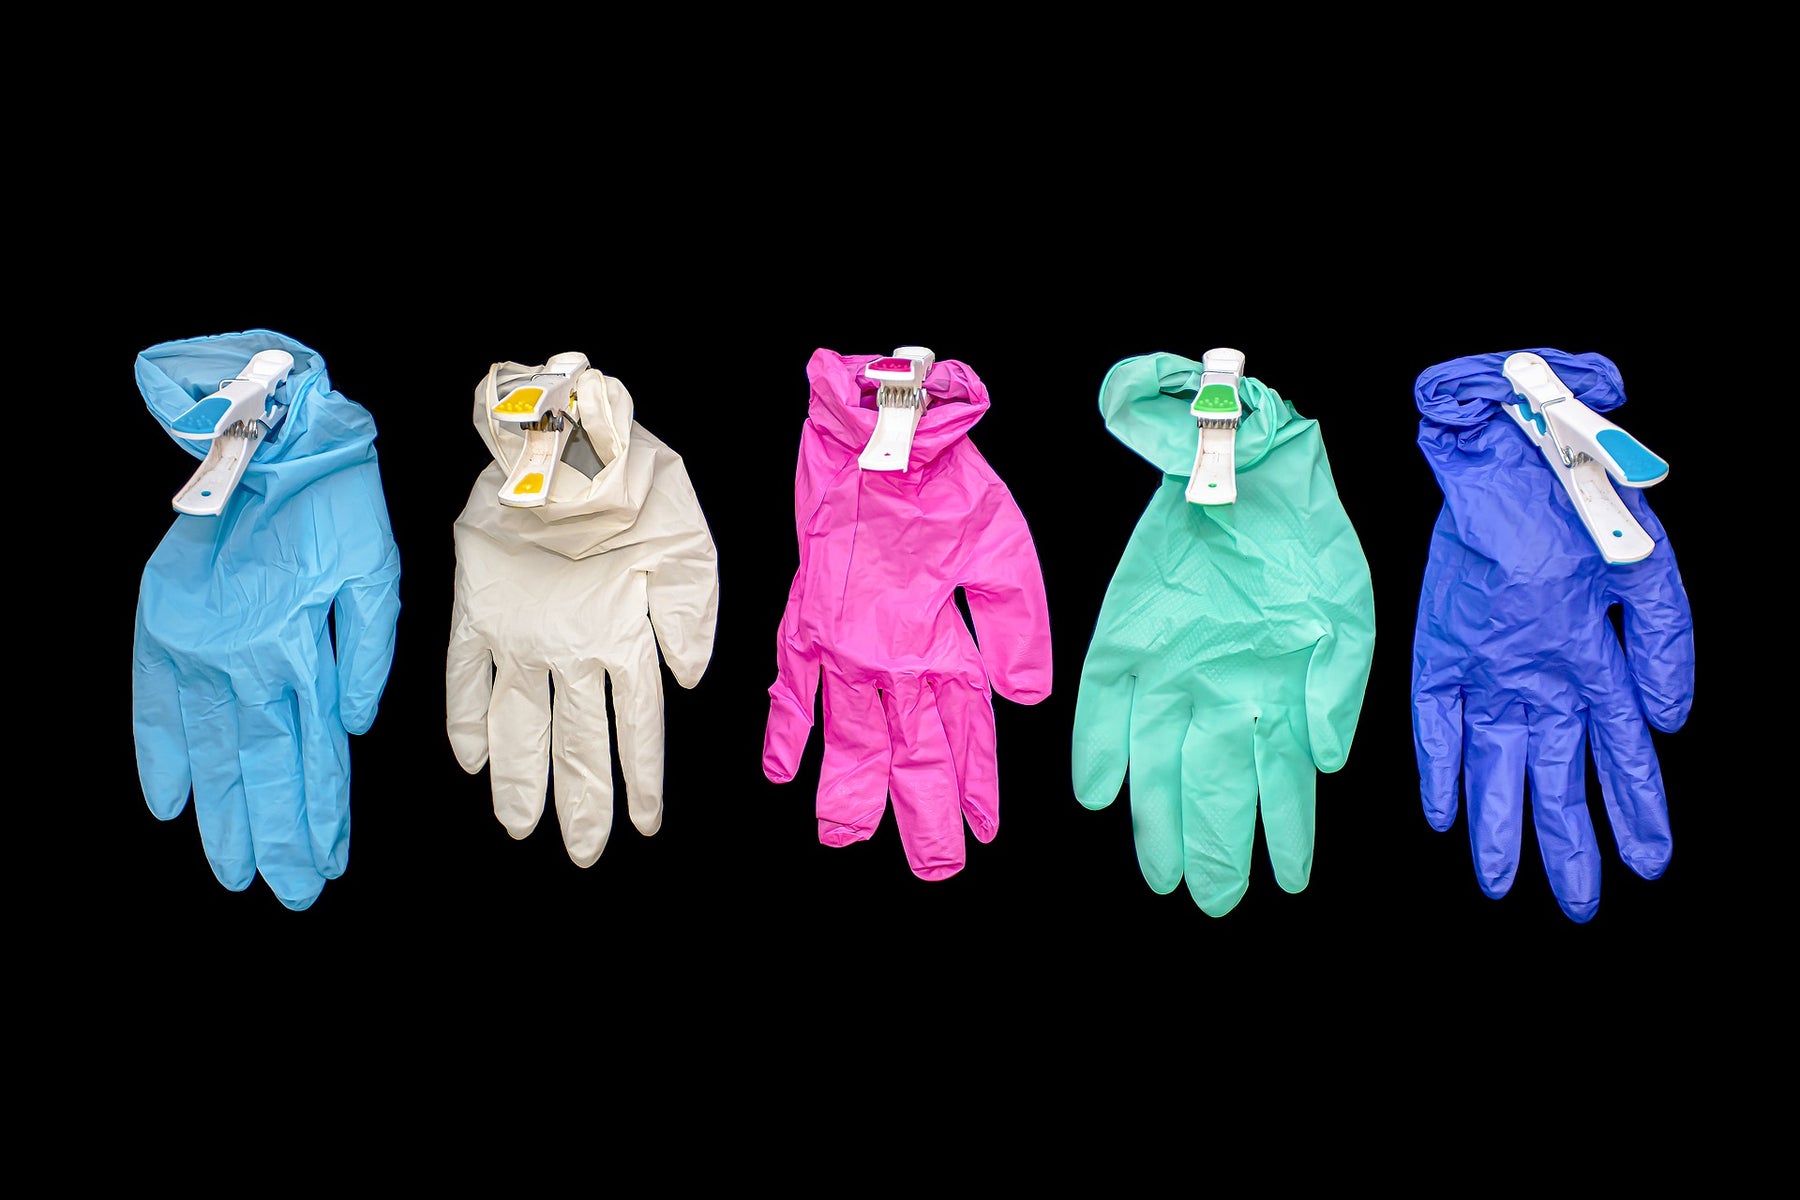 Five surgical gloves of different colors